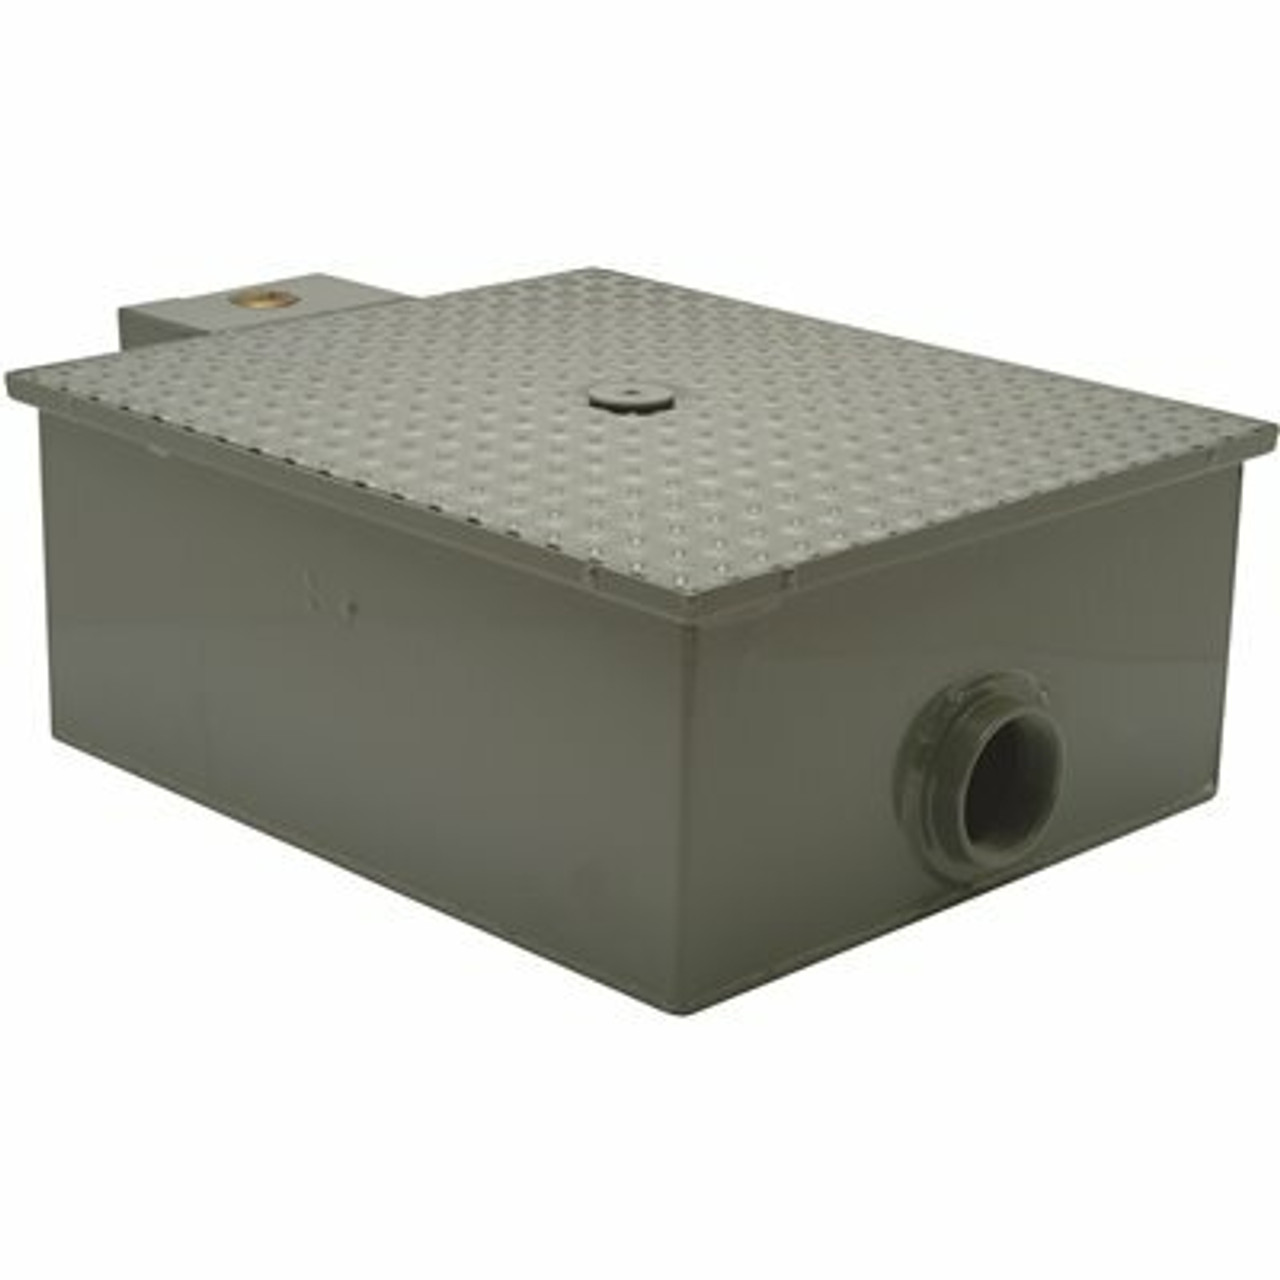 Zurn 10 In X 21 In Low-Profile Grease Trap With 3In. Nh Connection